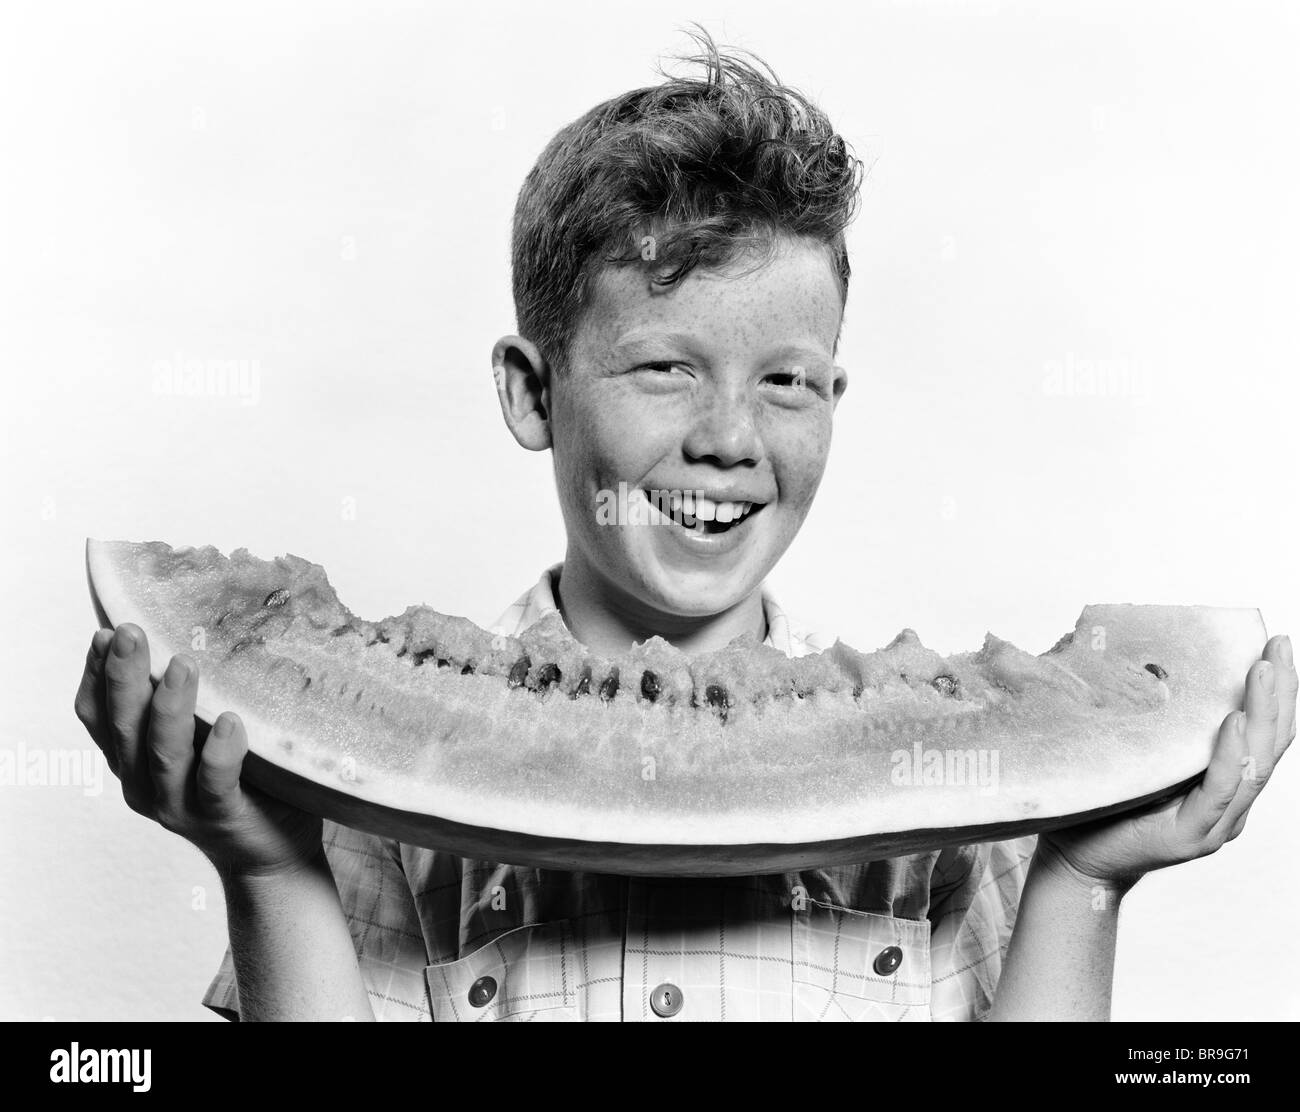 1940s 1950s SMILING BOY HOLDING EATING LARGE SLICE OF WATERMELON Stock Photo